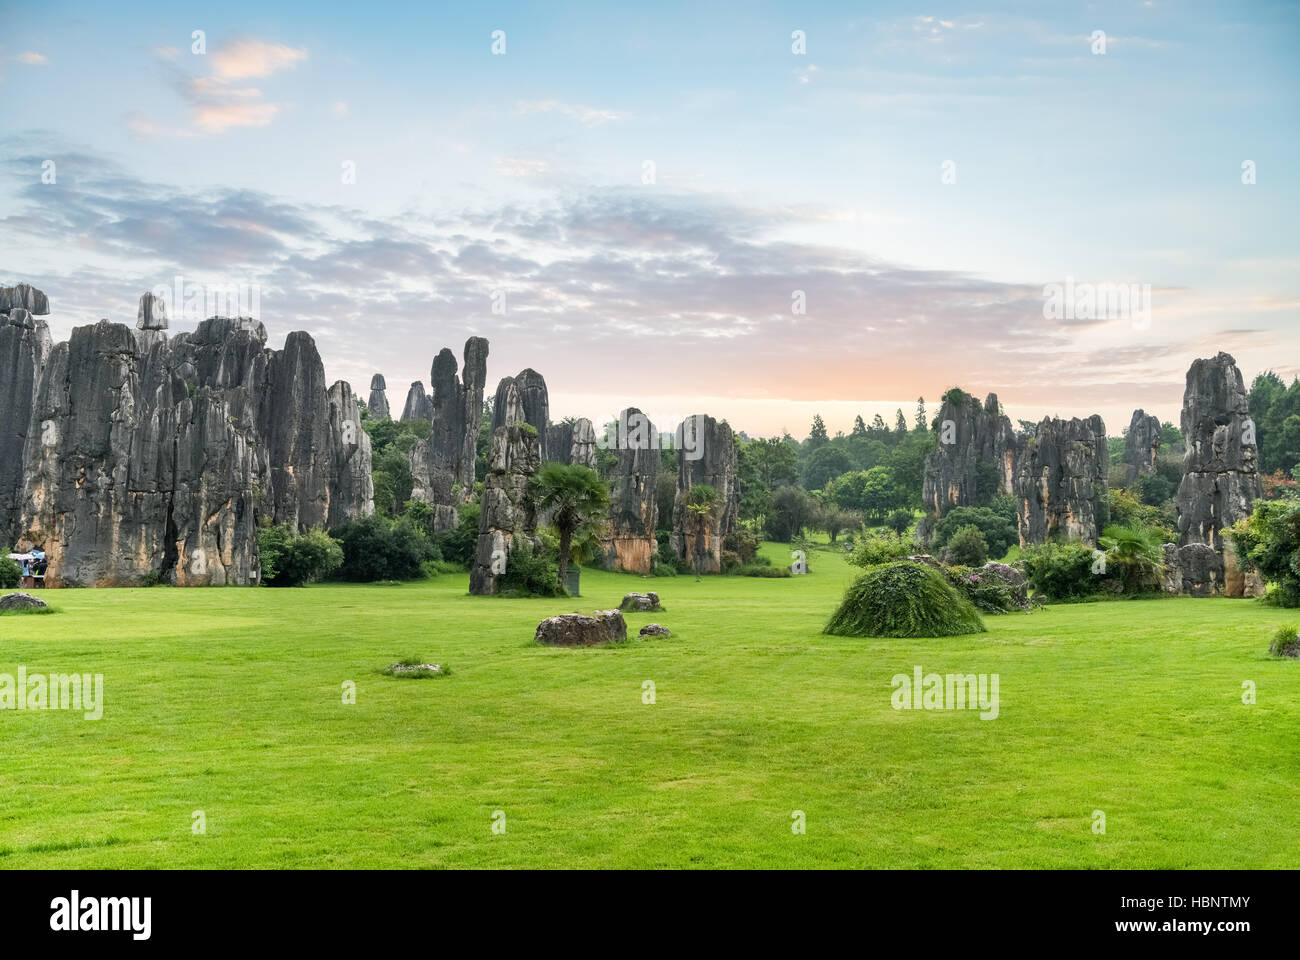 Stone Forest scenic Banque D'Images